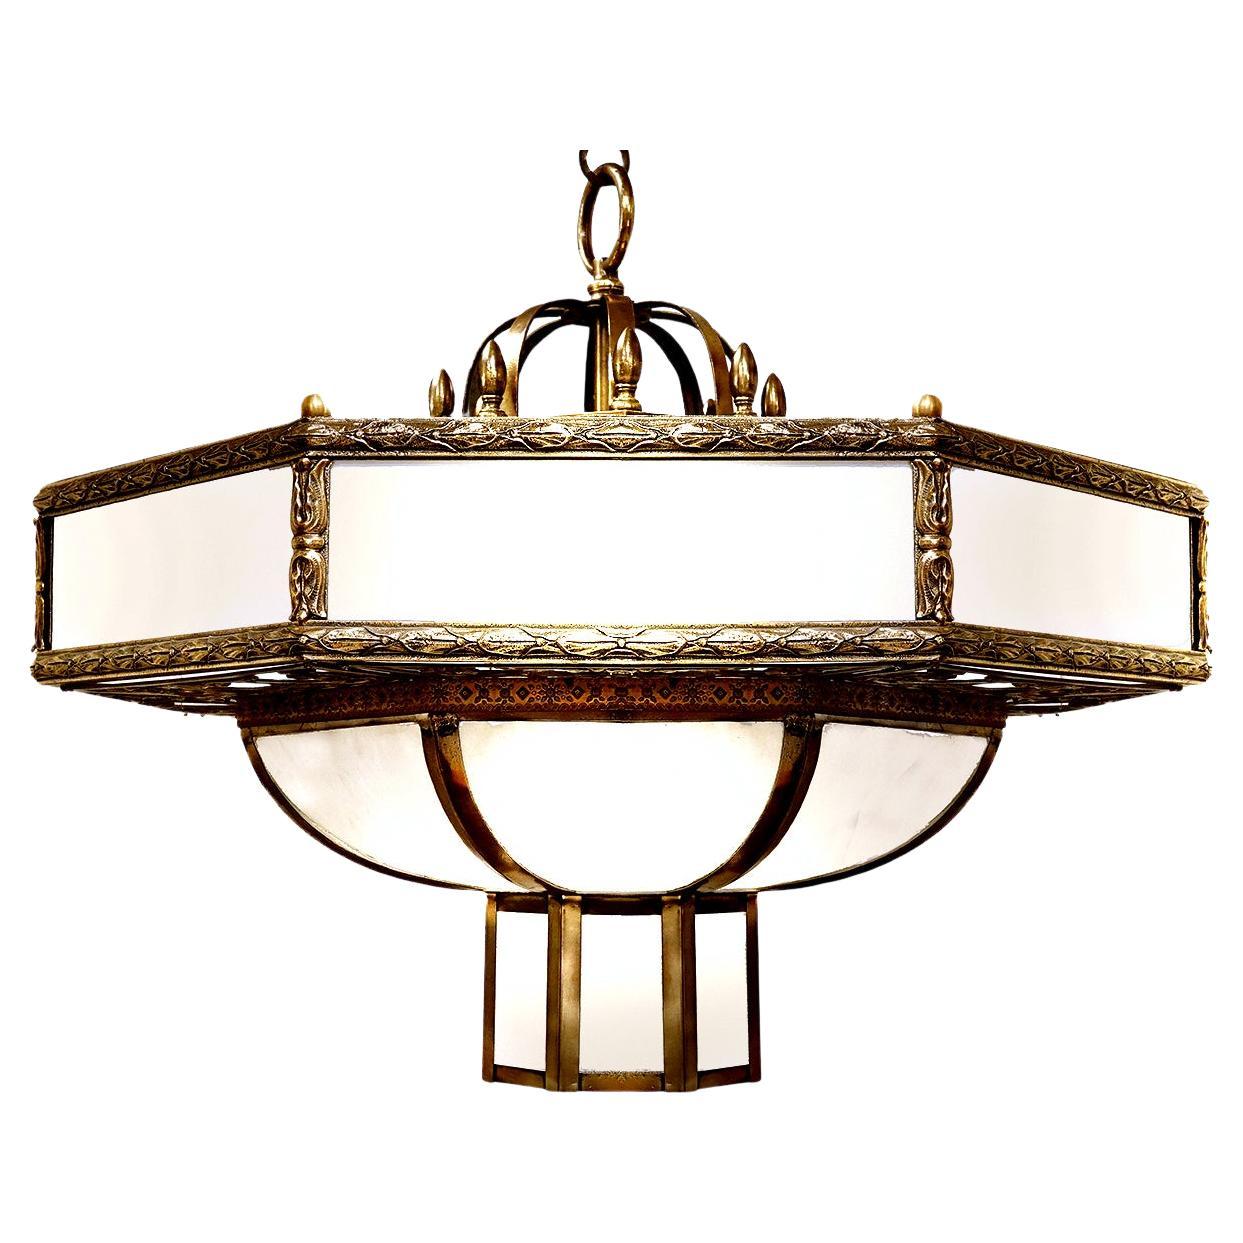 Monumental Classical Revival Chandelier For Sale